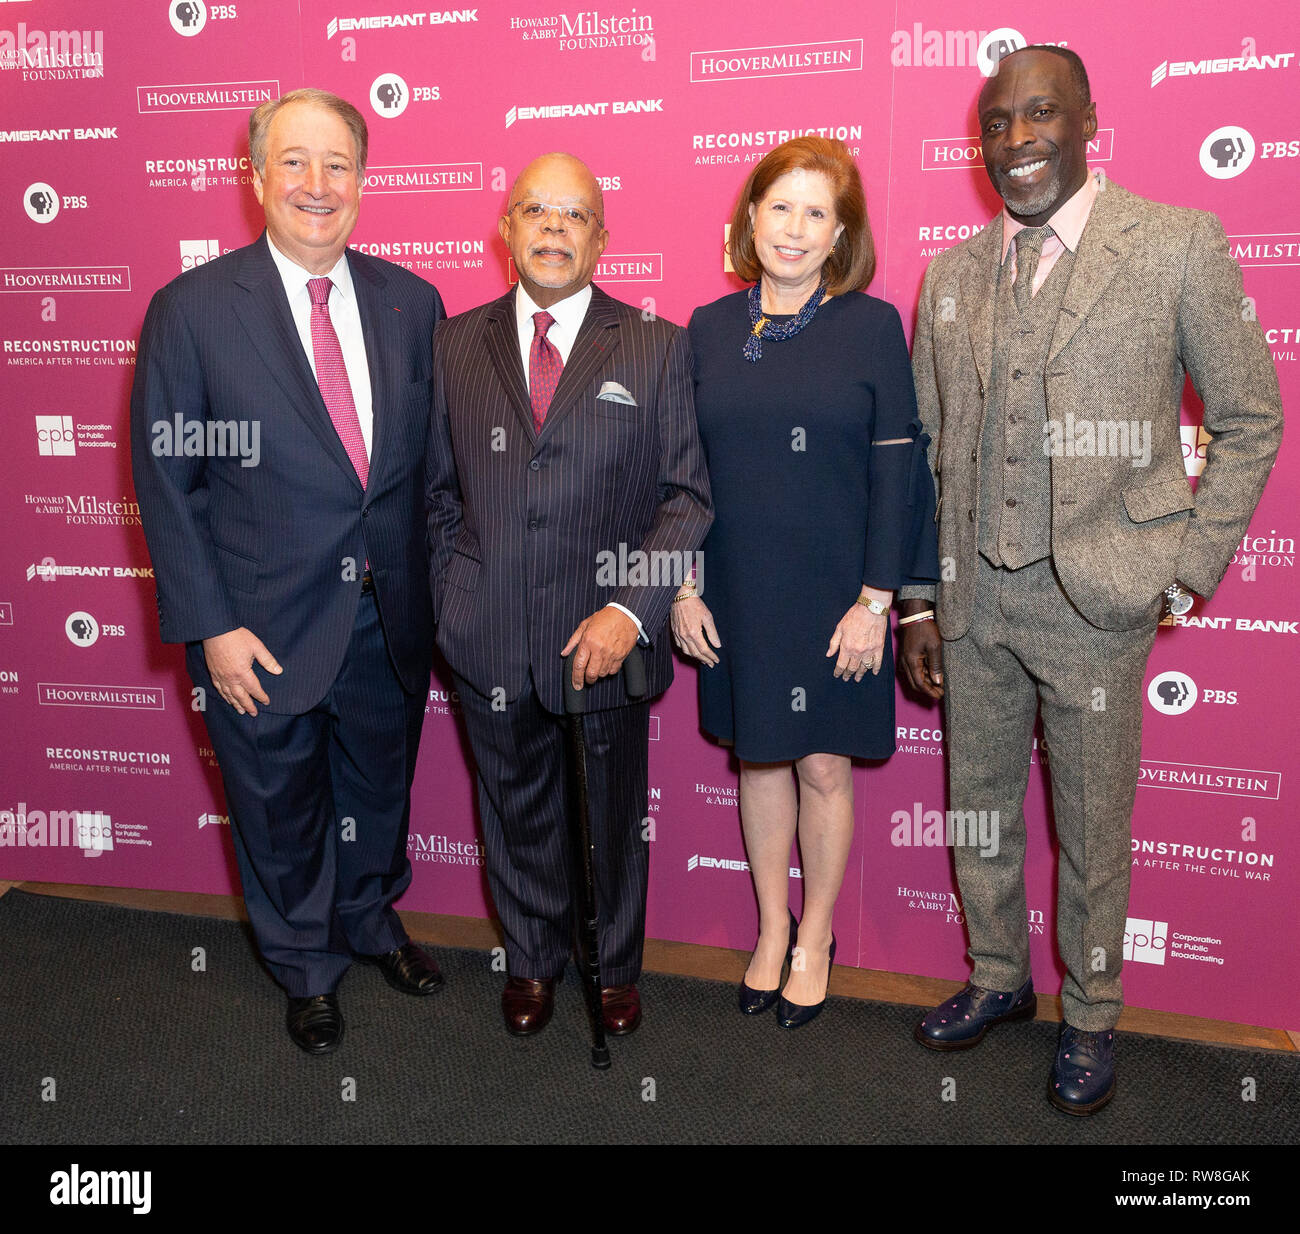 New York, United States. 04th Mar, 2019. Howard Milstein, Henry Louis Gates Jr., Abby Milstein, Michael Kenneth Williams attend the Reconstruction: America After The Civil War premiere at New York Historical Society Credit: Lev Radin/Pacific Press/Alamy Live News Stock Photo